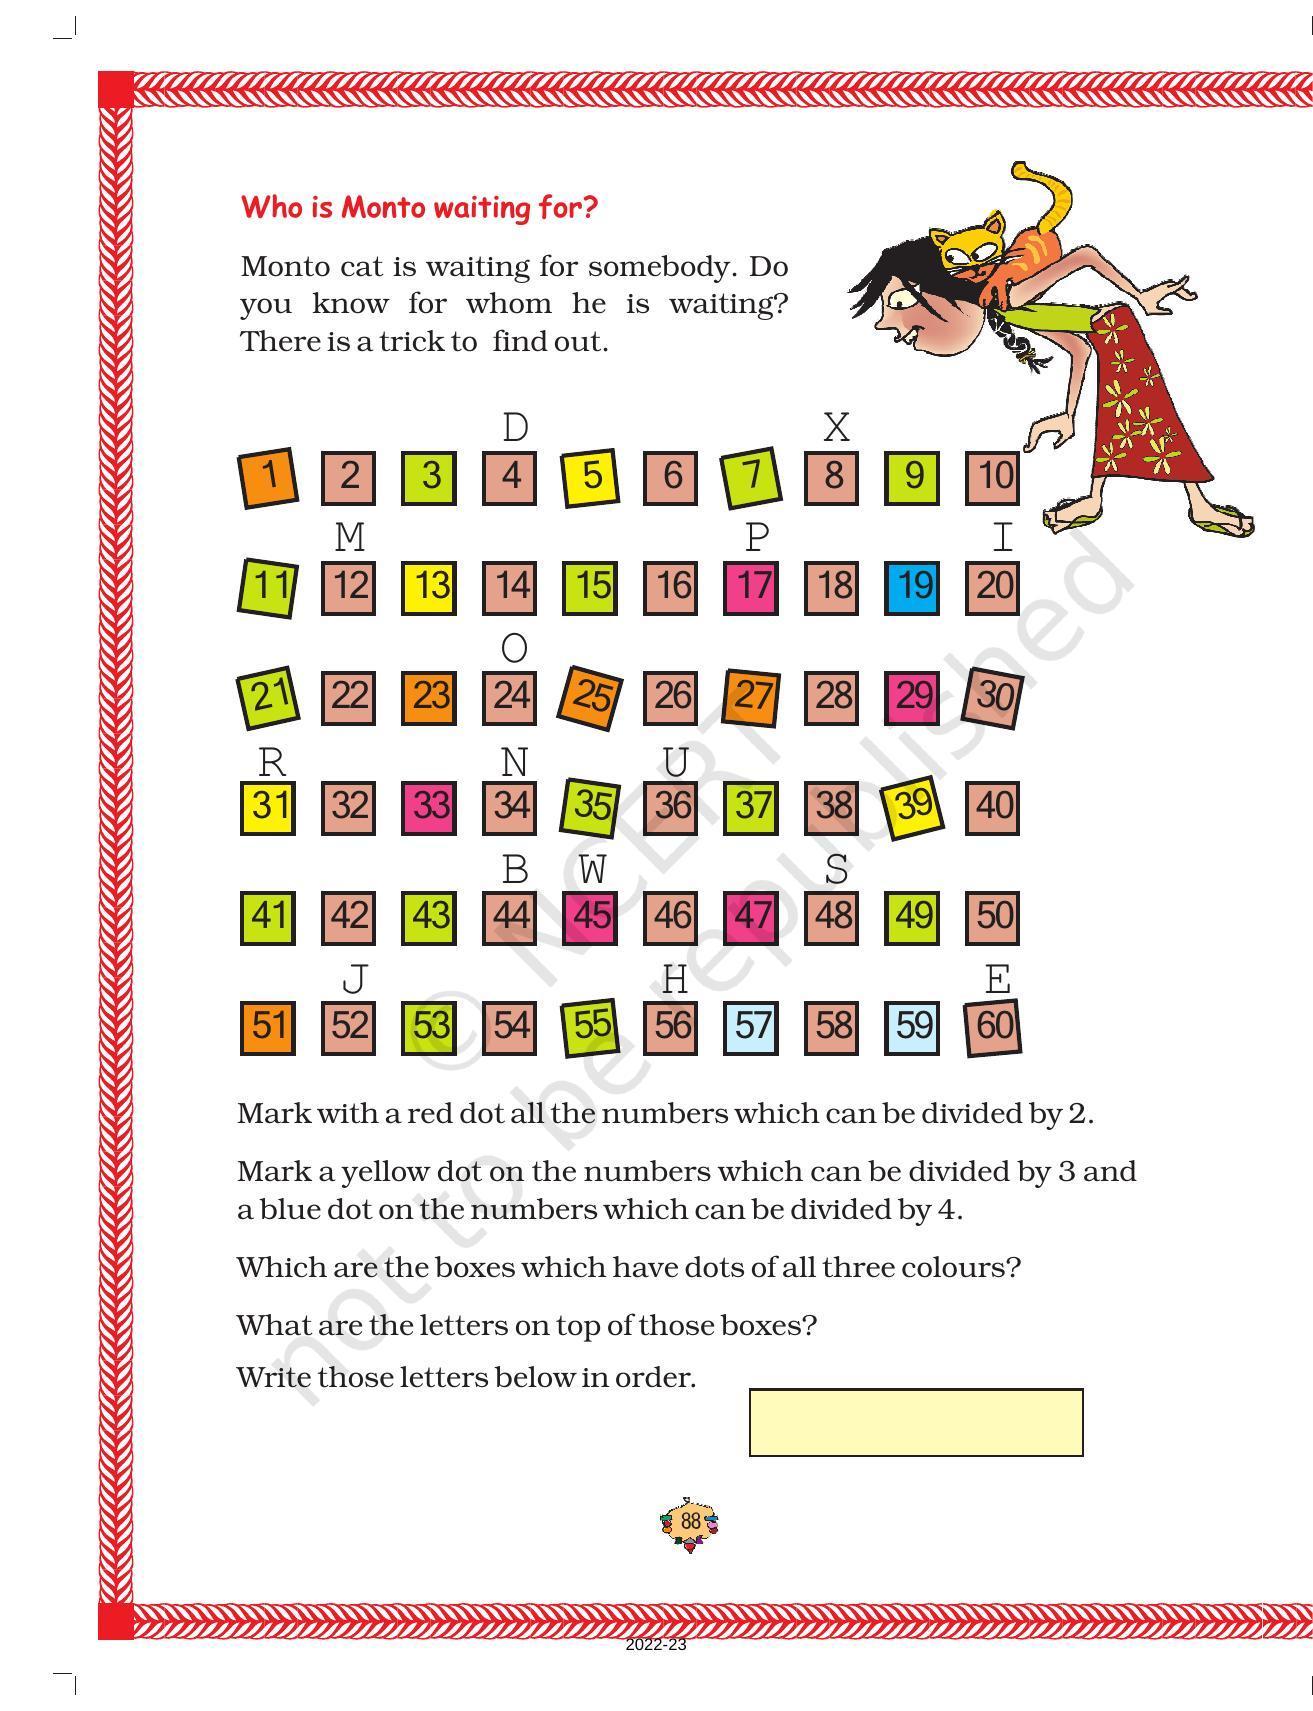 NCERT Book for Class 5 Maths Chapter 6 Be My Multiple, I’ll be Your Factor - Page 2